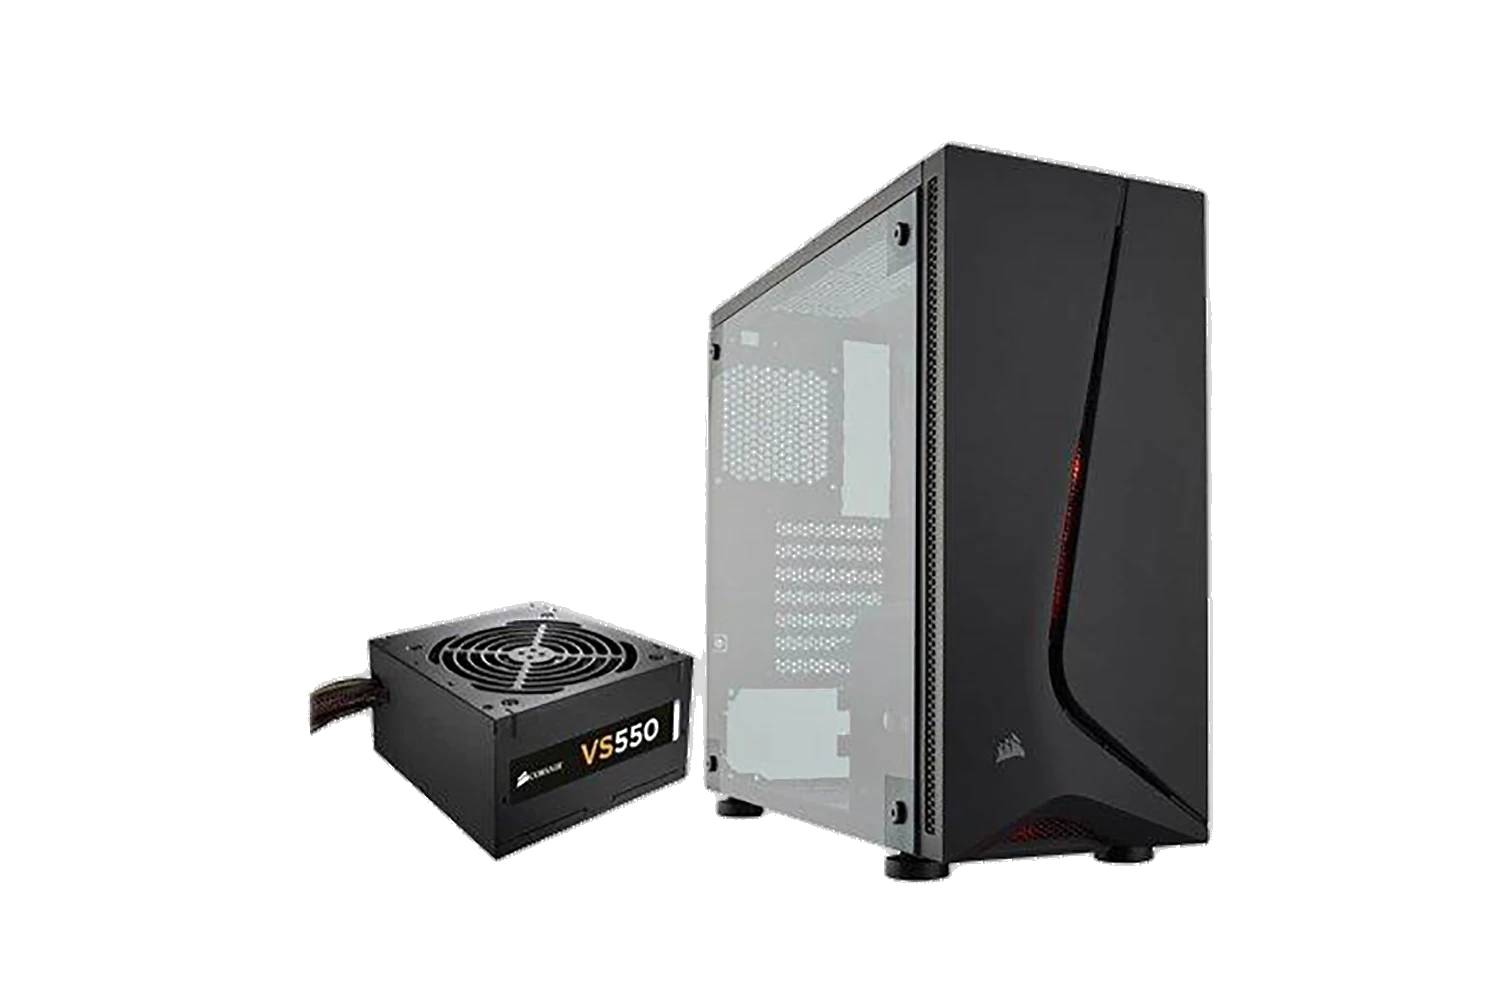 Corsair Spec 05 Mid Tower Red LED Cabinet with VS550 PSU (Black)